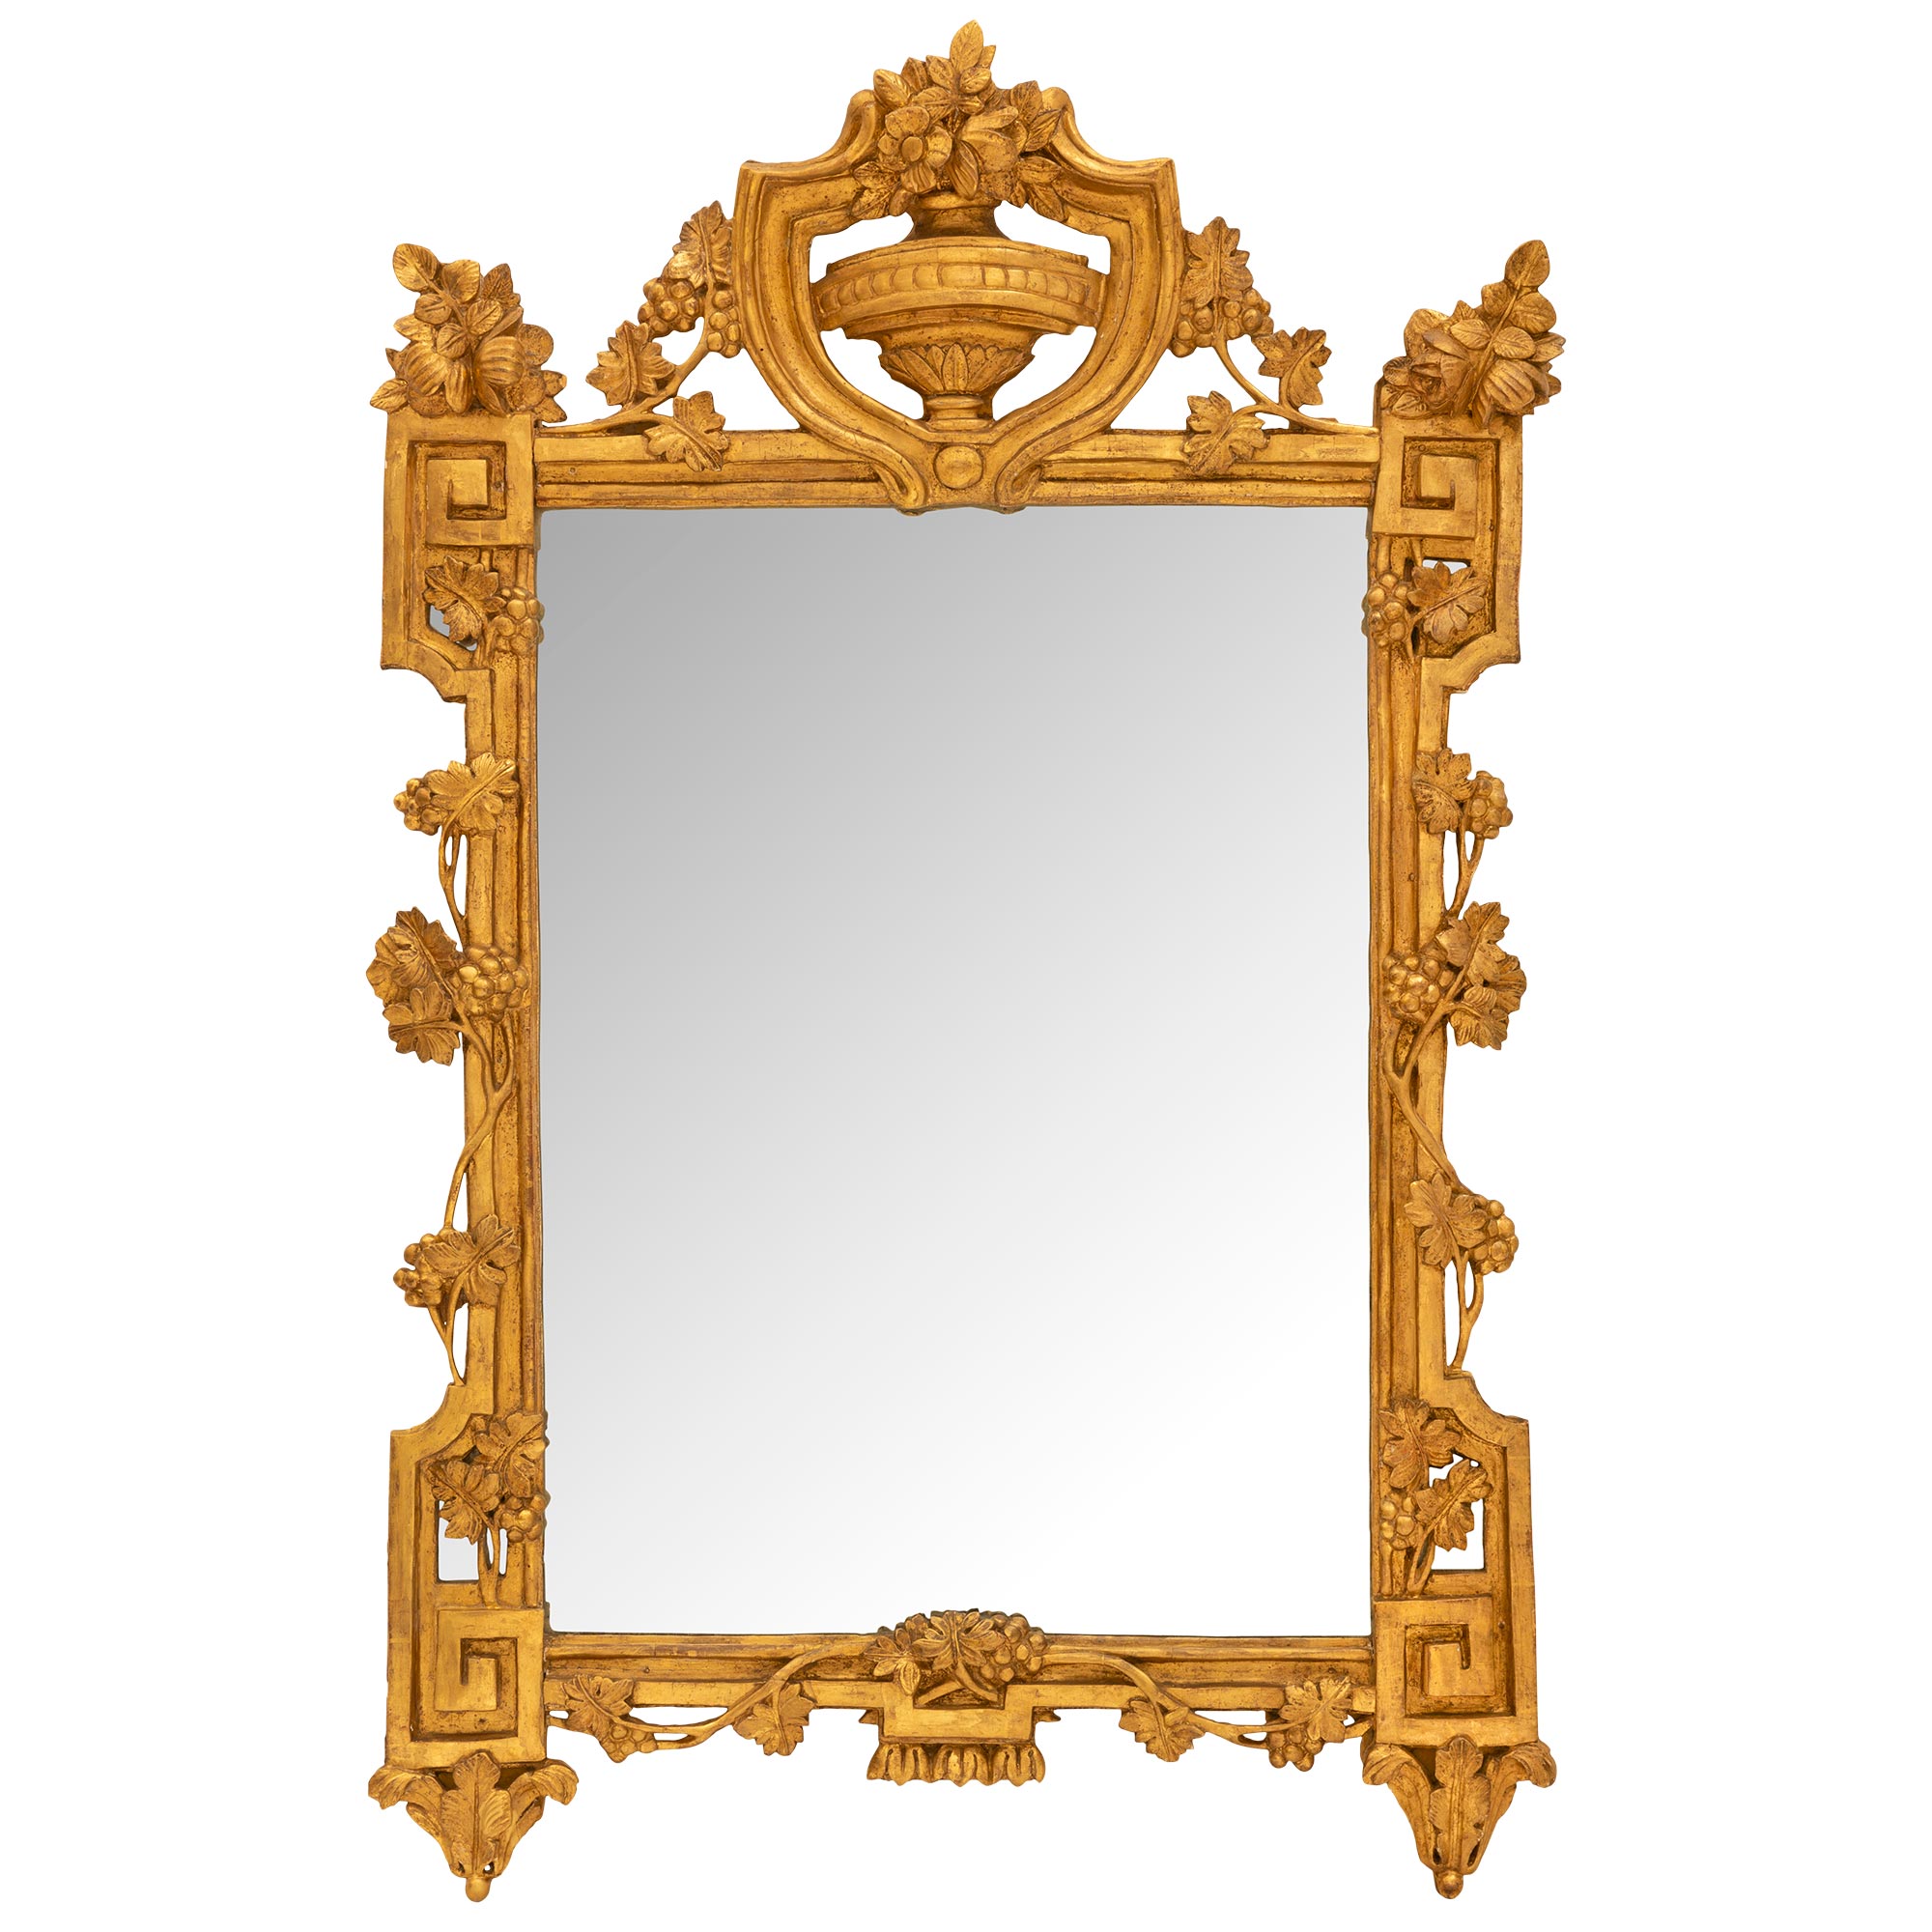 French 18th Century Régence Period Provançal Style Giltwood Mirror For Sale